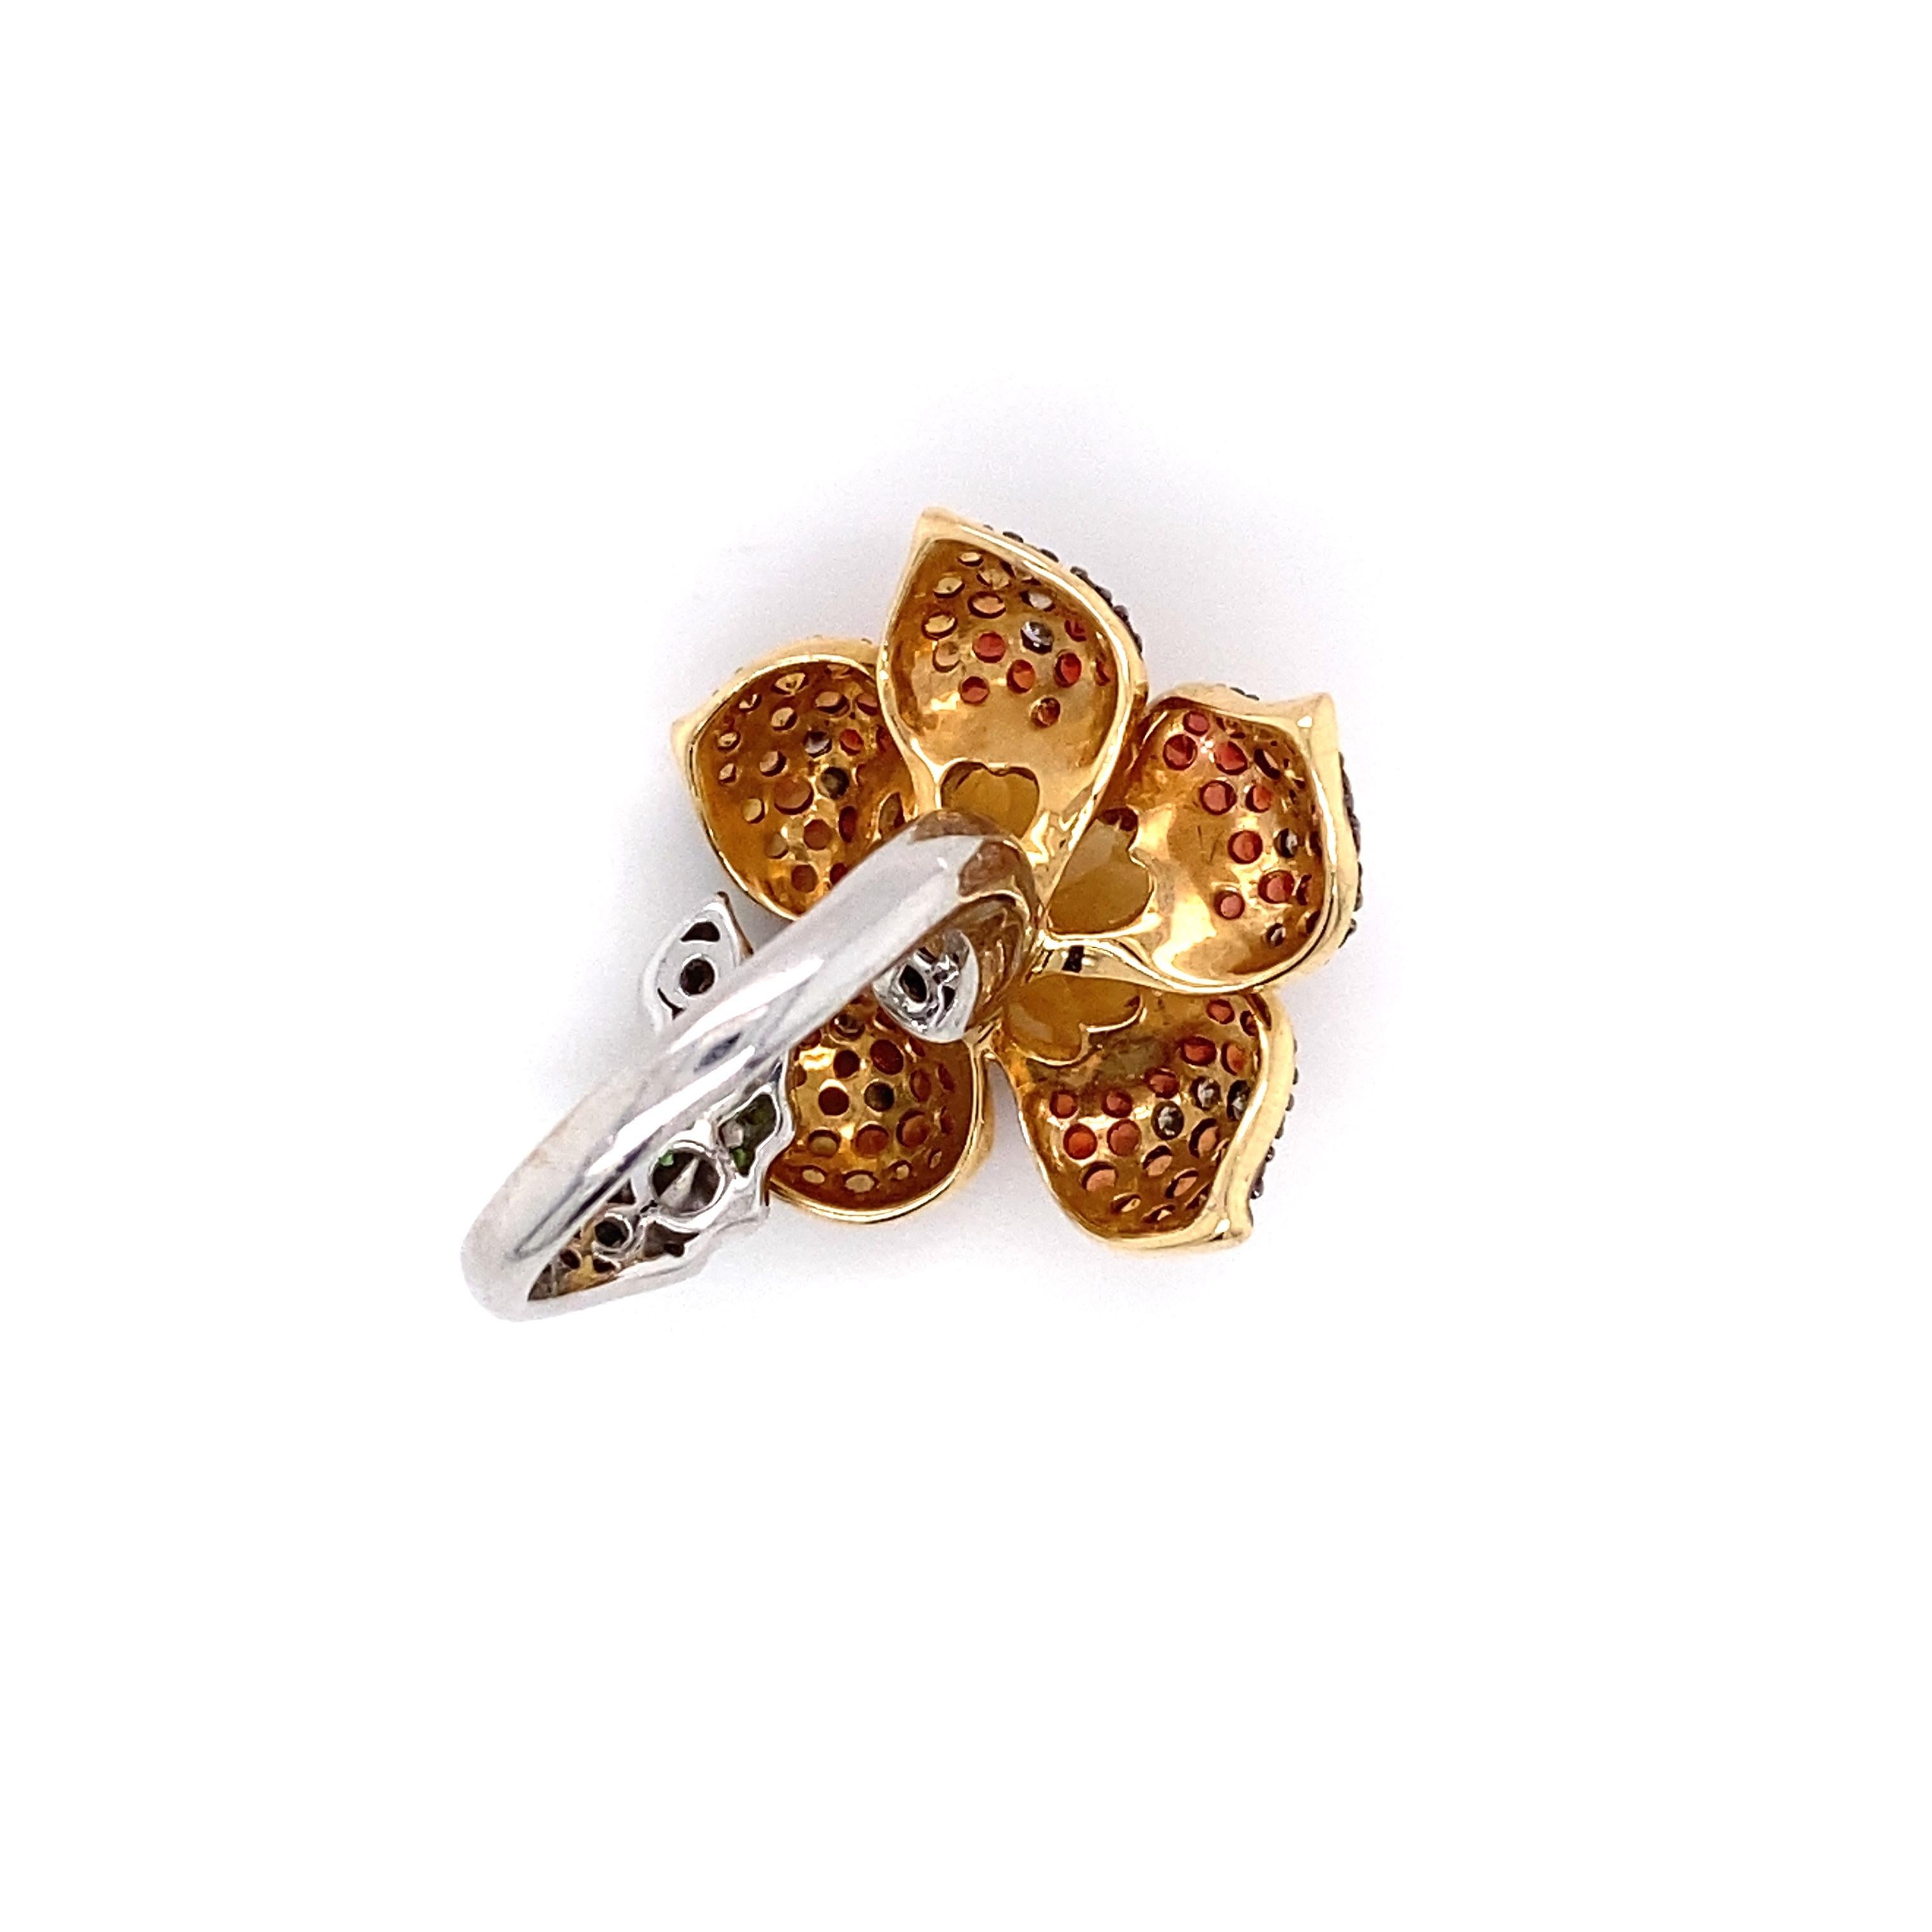 Multicolored Garnet, Citrine, and Diamond Flower Ring in 14 Karat Gold In Excellent Condition For Sale In Atlanta, GA